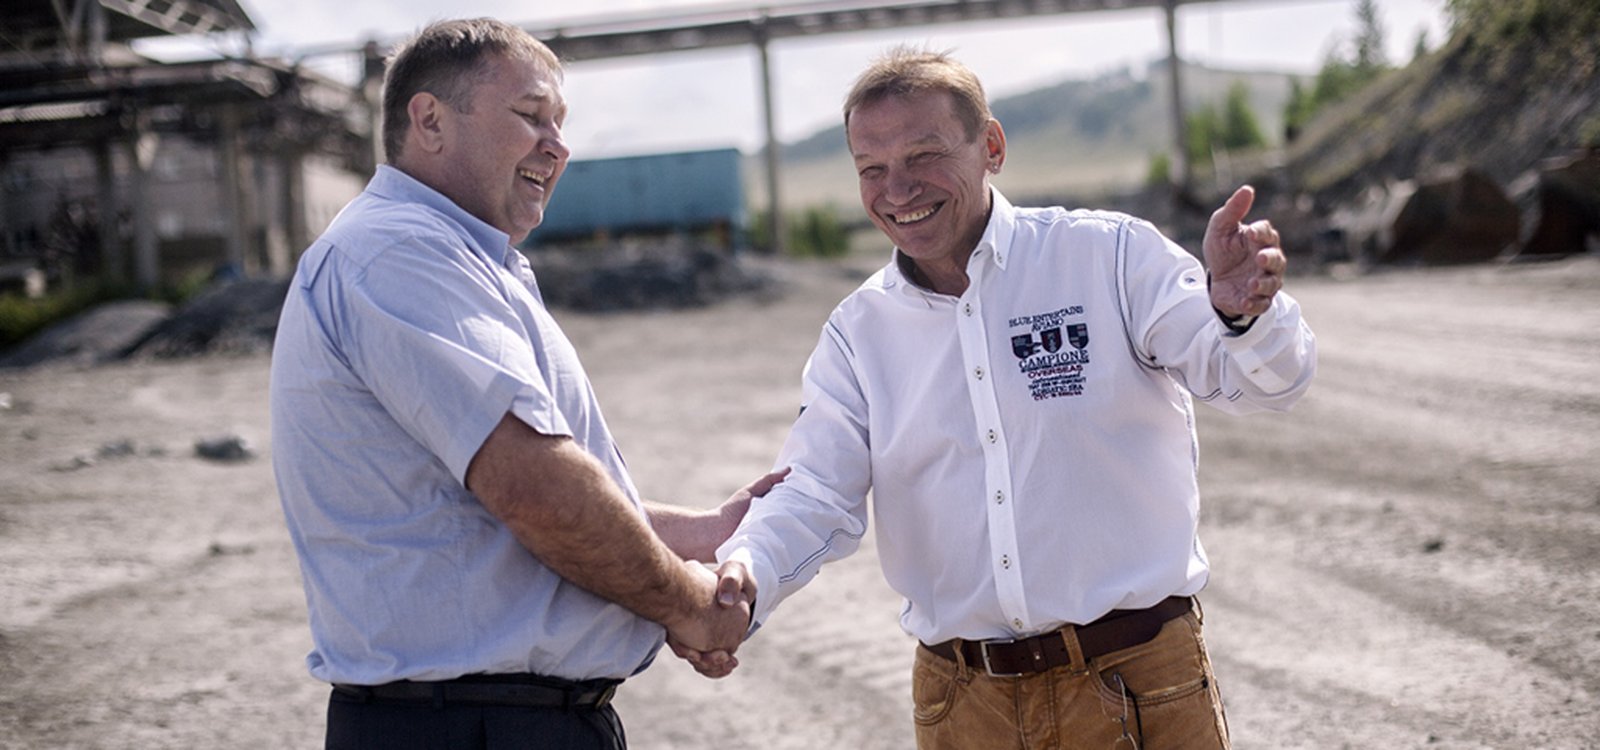 Sandvik Mining sales manager Amur Idrissov and Vladimir Grigoriev, director of the Mine Construction Department, a unit of Uchaly GOK, are building on a cooperation that dates back to the early 1990s.